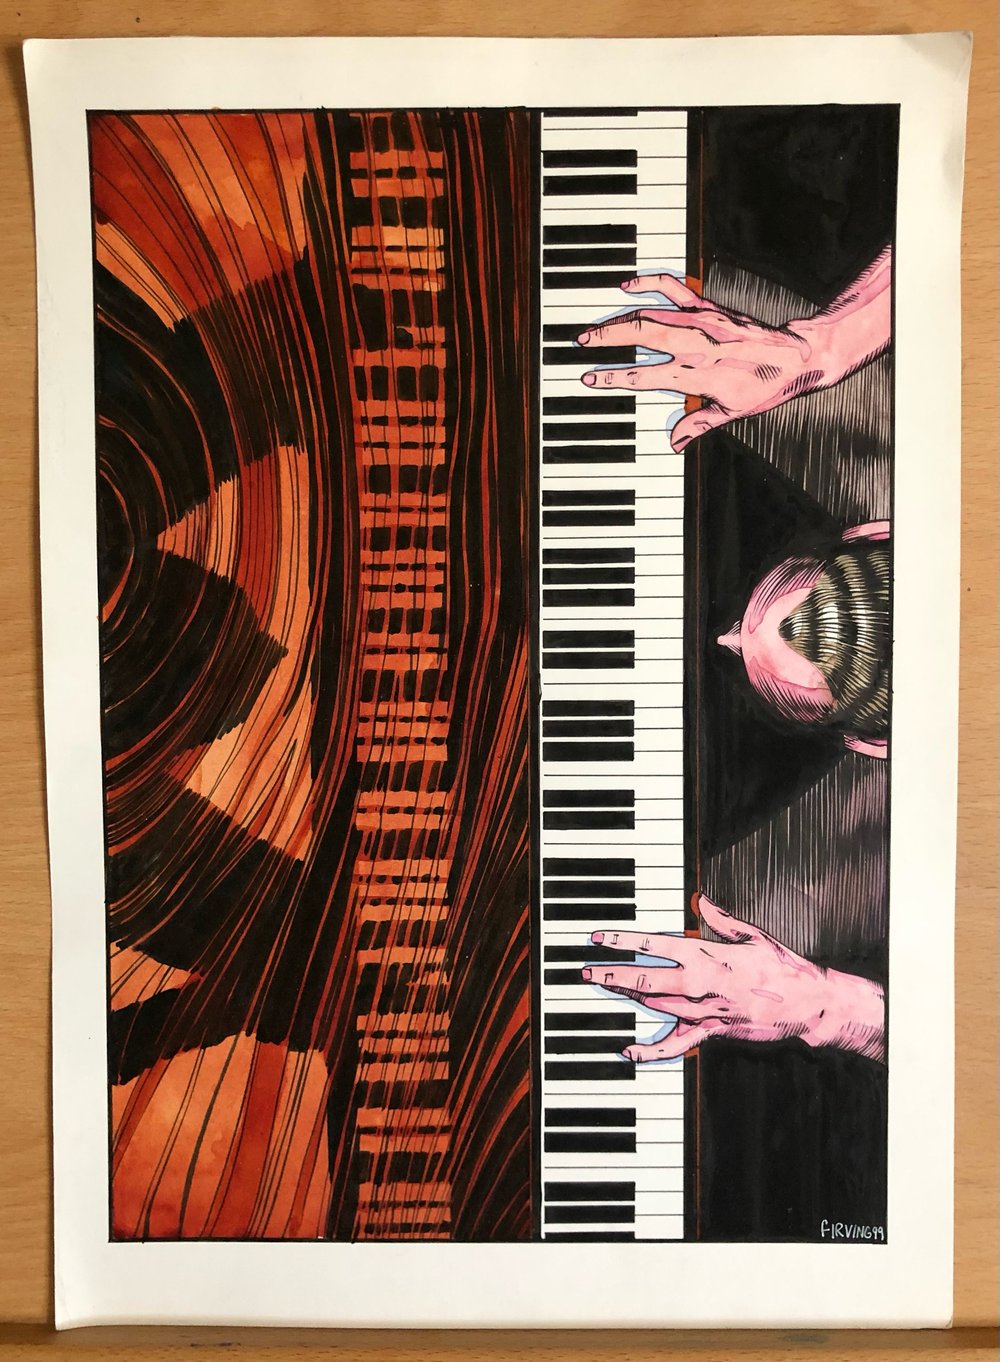 Image of Pianist